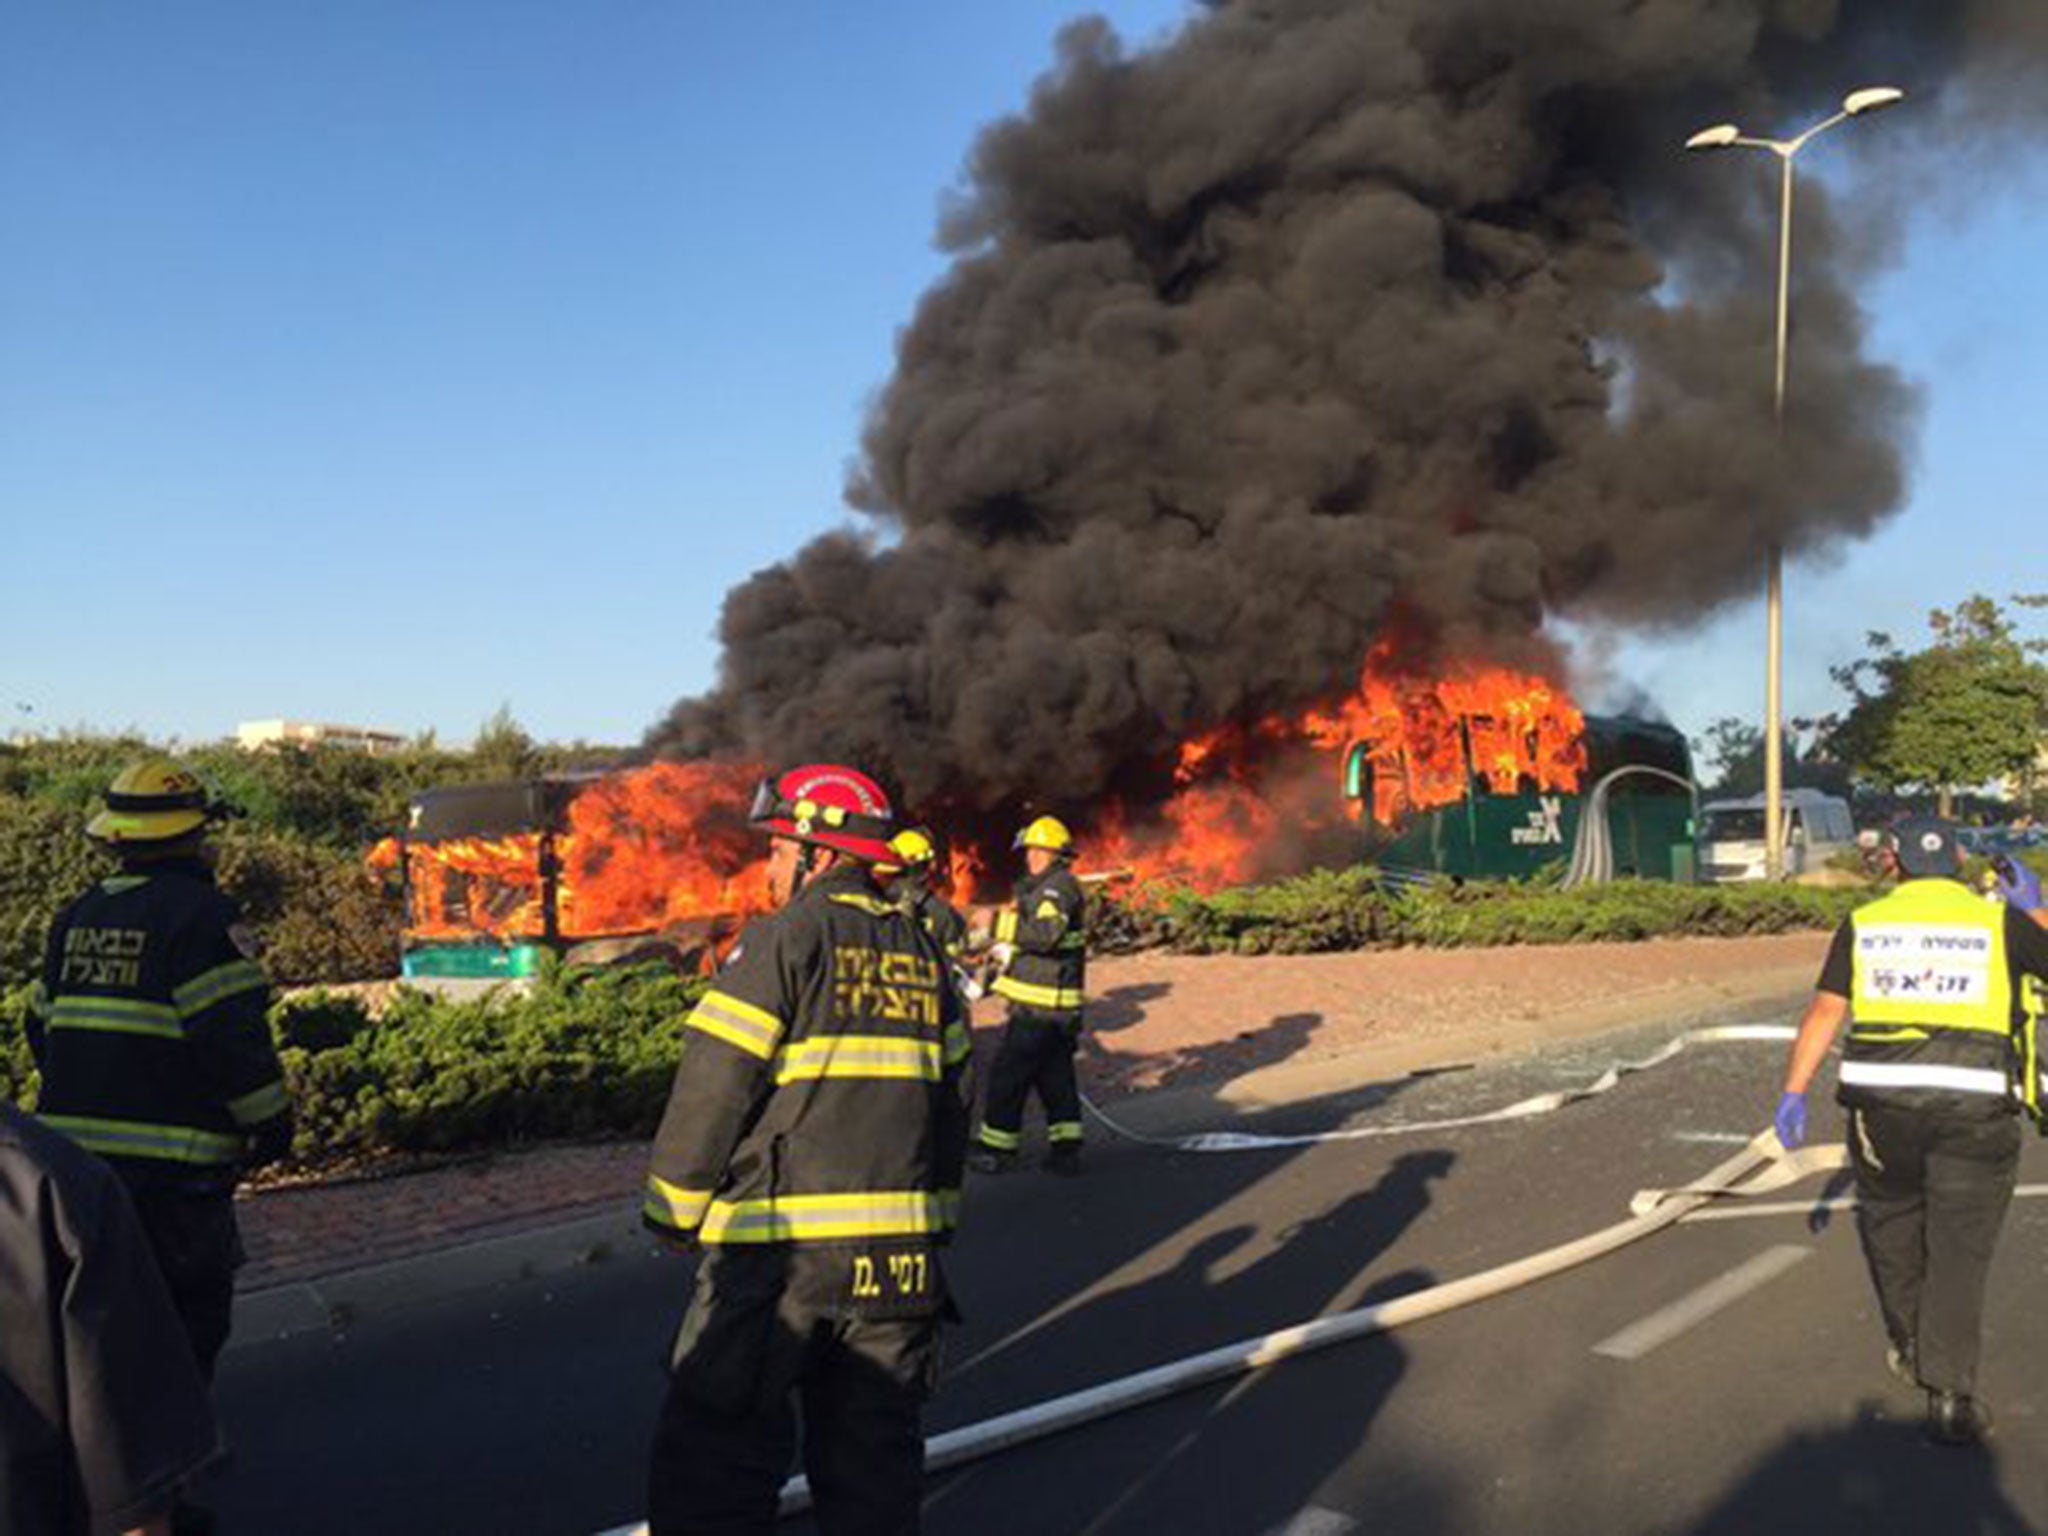 Images on social media showed smoke billowing from the burned-out bus